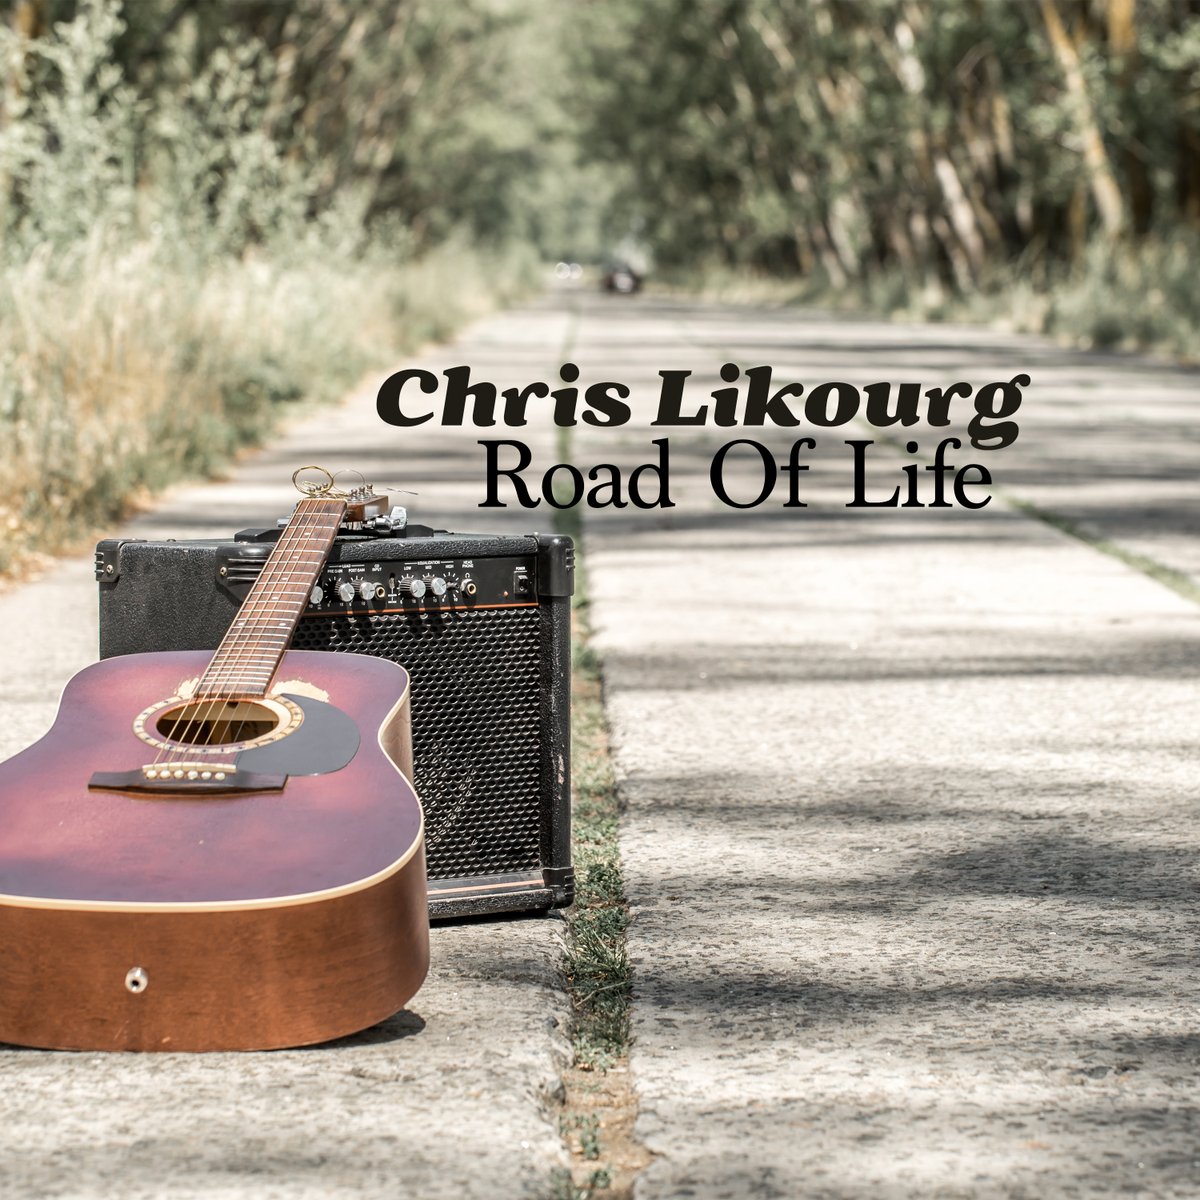 Chris Likourg is a singer/songwriter from New Brunswick, Canada. This song is about the hope we carry throughout life and that each day is a brand new day! youtu.be/TYhjKVv8-kg